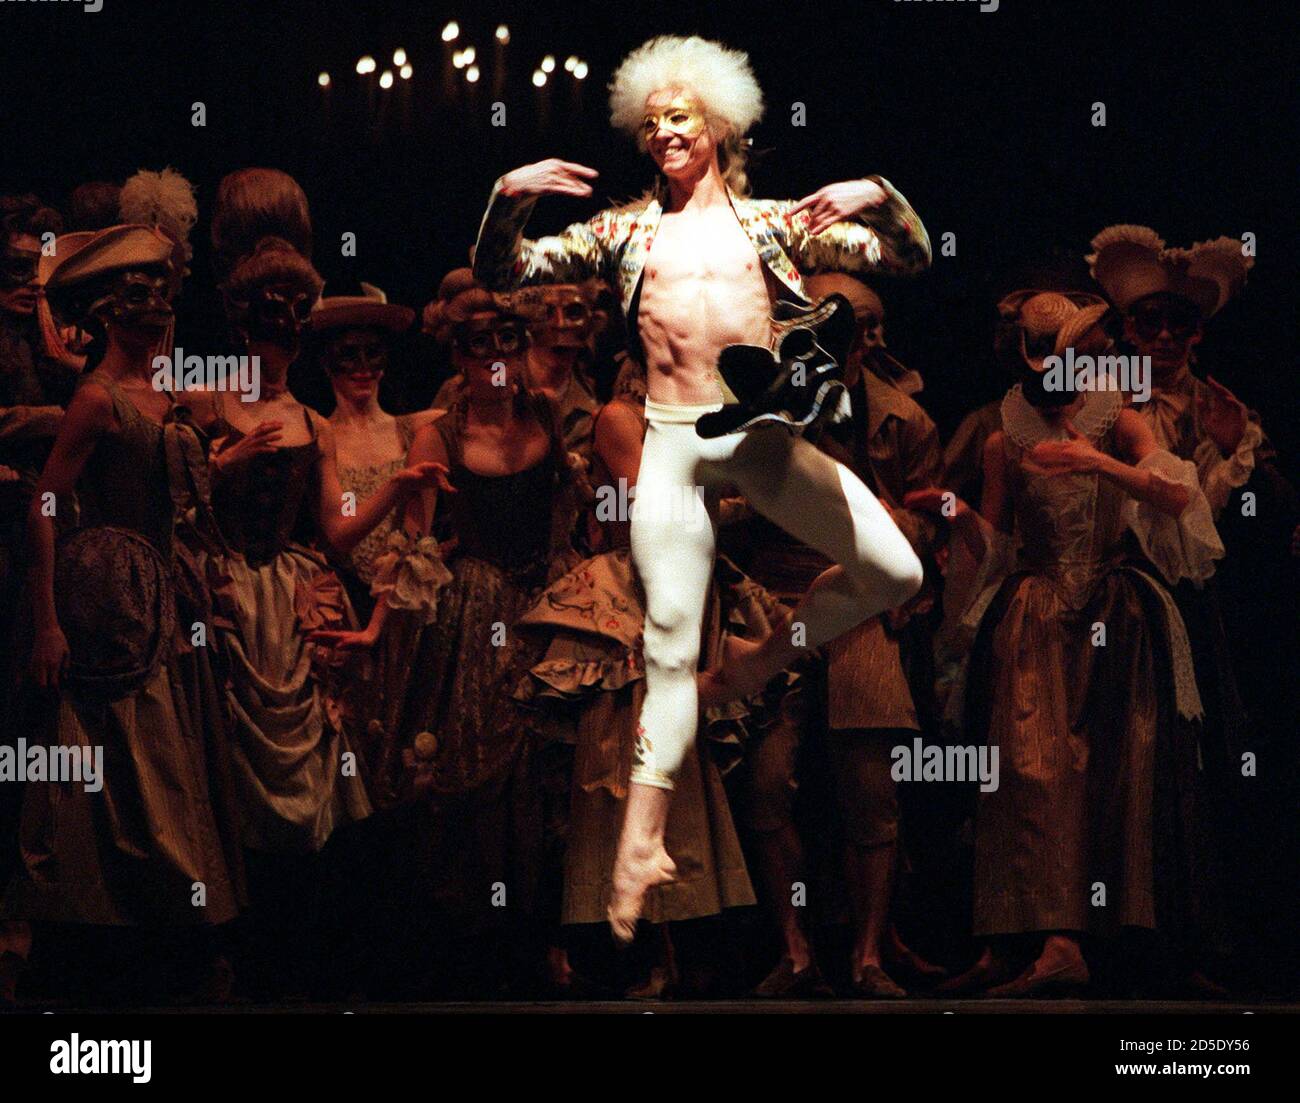 Ukrainian ballet star Vladimir Malakhov performs as Wolfgang Amadeus Mozart  in a new ballet by Vienna's State Opera which premiered to a sold out house  March 12. The alleged rivalry between composers